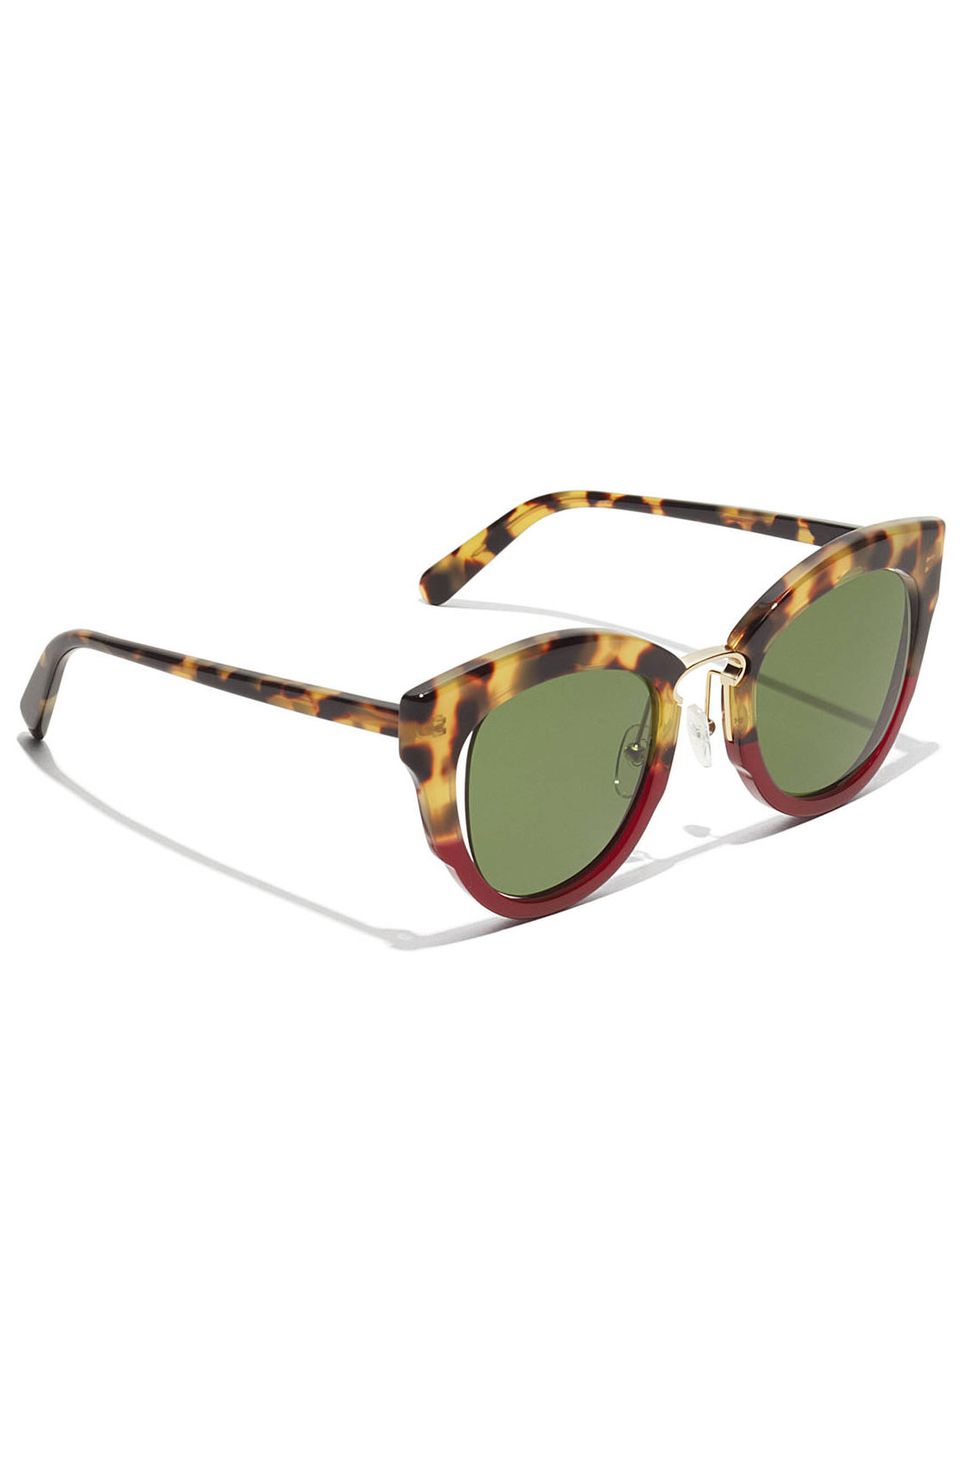 <p>Shades become an integral part of your outfit come the sunnier months. Pick a luxe style that looks good on or perched on your head.</p><p><em data-redactor-tag="em" data-verified="redactor">Ferragamo Sunglasses, $375; </em><a href="http://www.ferragamo.com/shop/en/usa/women/lifestyle-accessories/eyewear/color-block-661847" target="_blank" data-tracking-id="recirc-text-link"><em data-redactor-tag="em" data-verified="redactor">ferragamo.com</em></a></p>